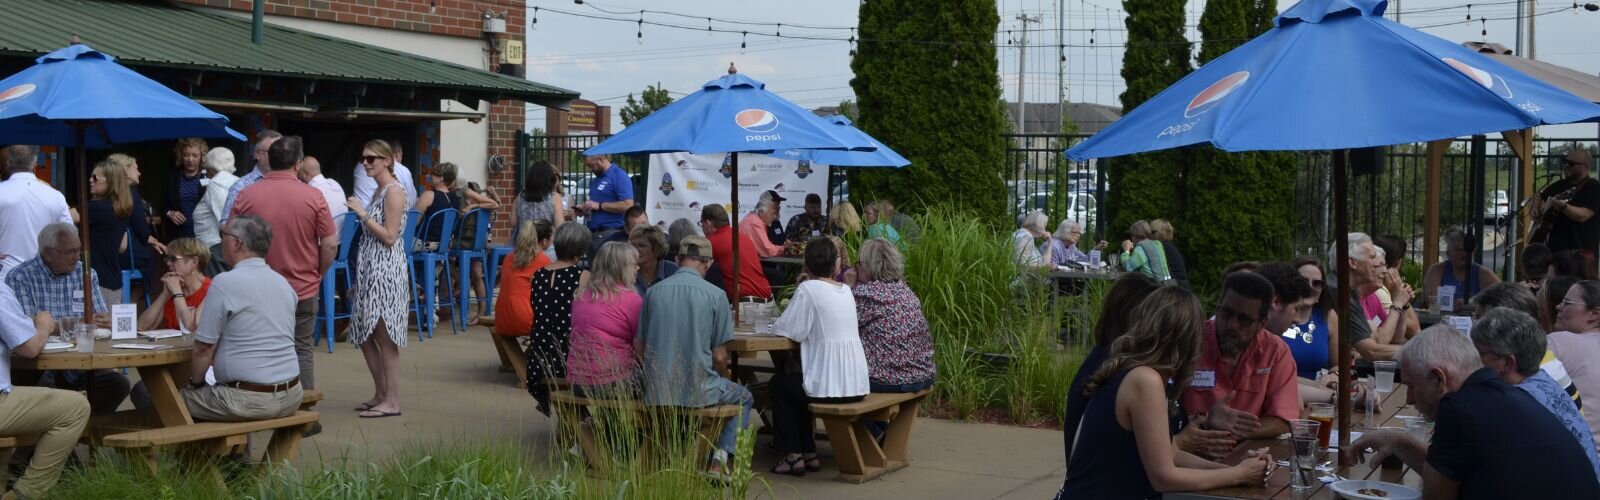 Mt. Pleasant Area Community Foundation’s Summer Celebration will take place at Hunter’s Ale House on June 27 this year.